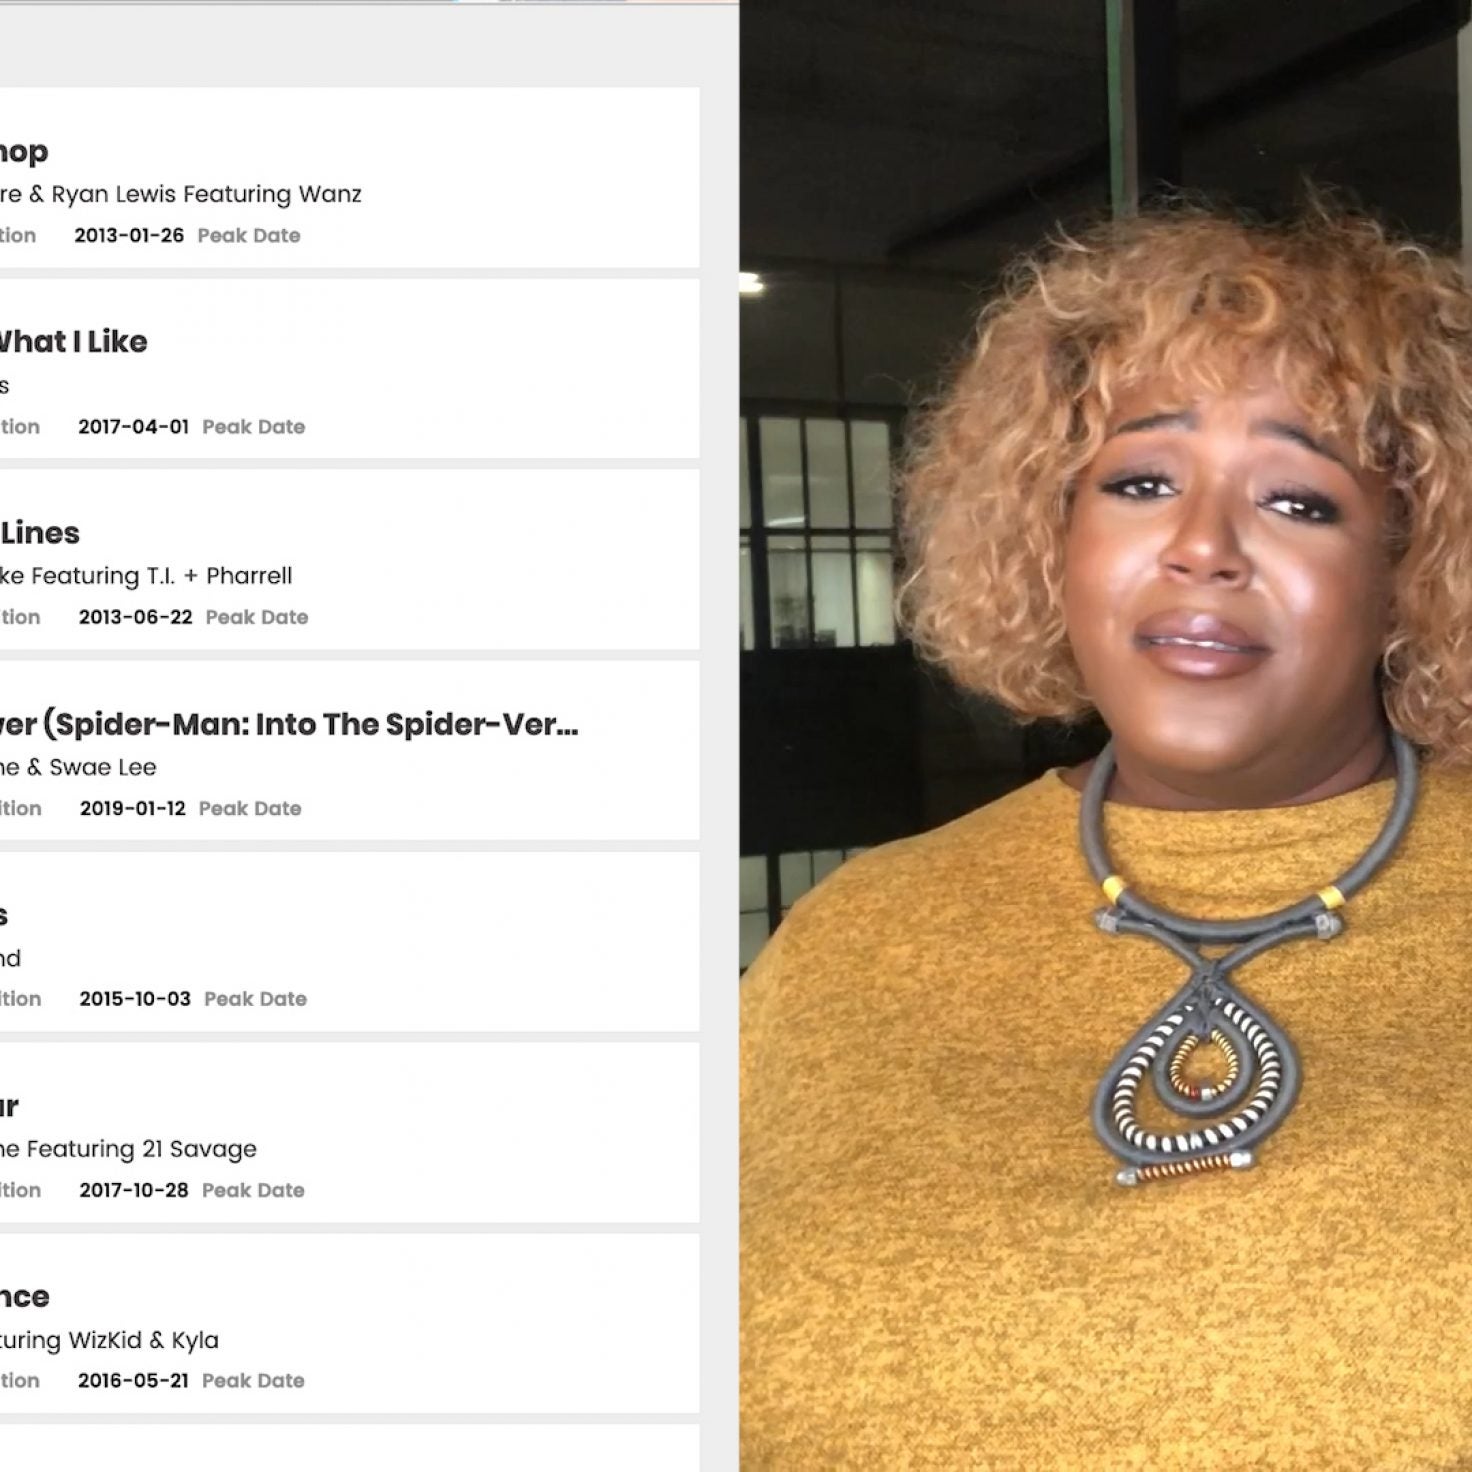 Watch The OverExplainer React To The Interesting 'Billboard' Hot Hip-Hop And R&B Songs Of The Decade List